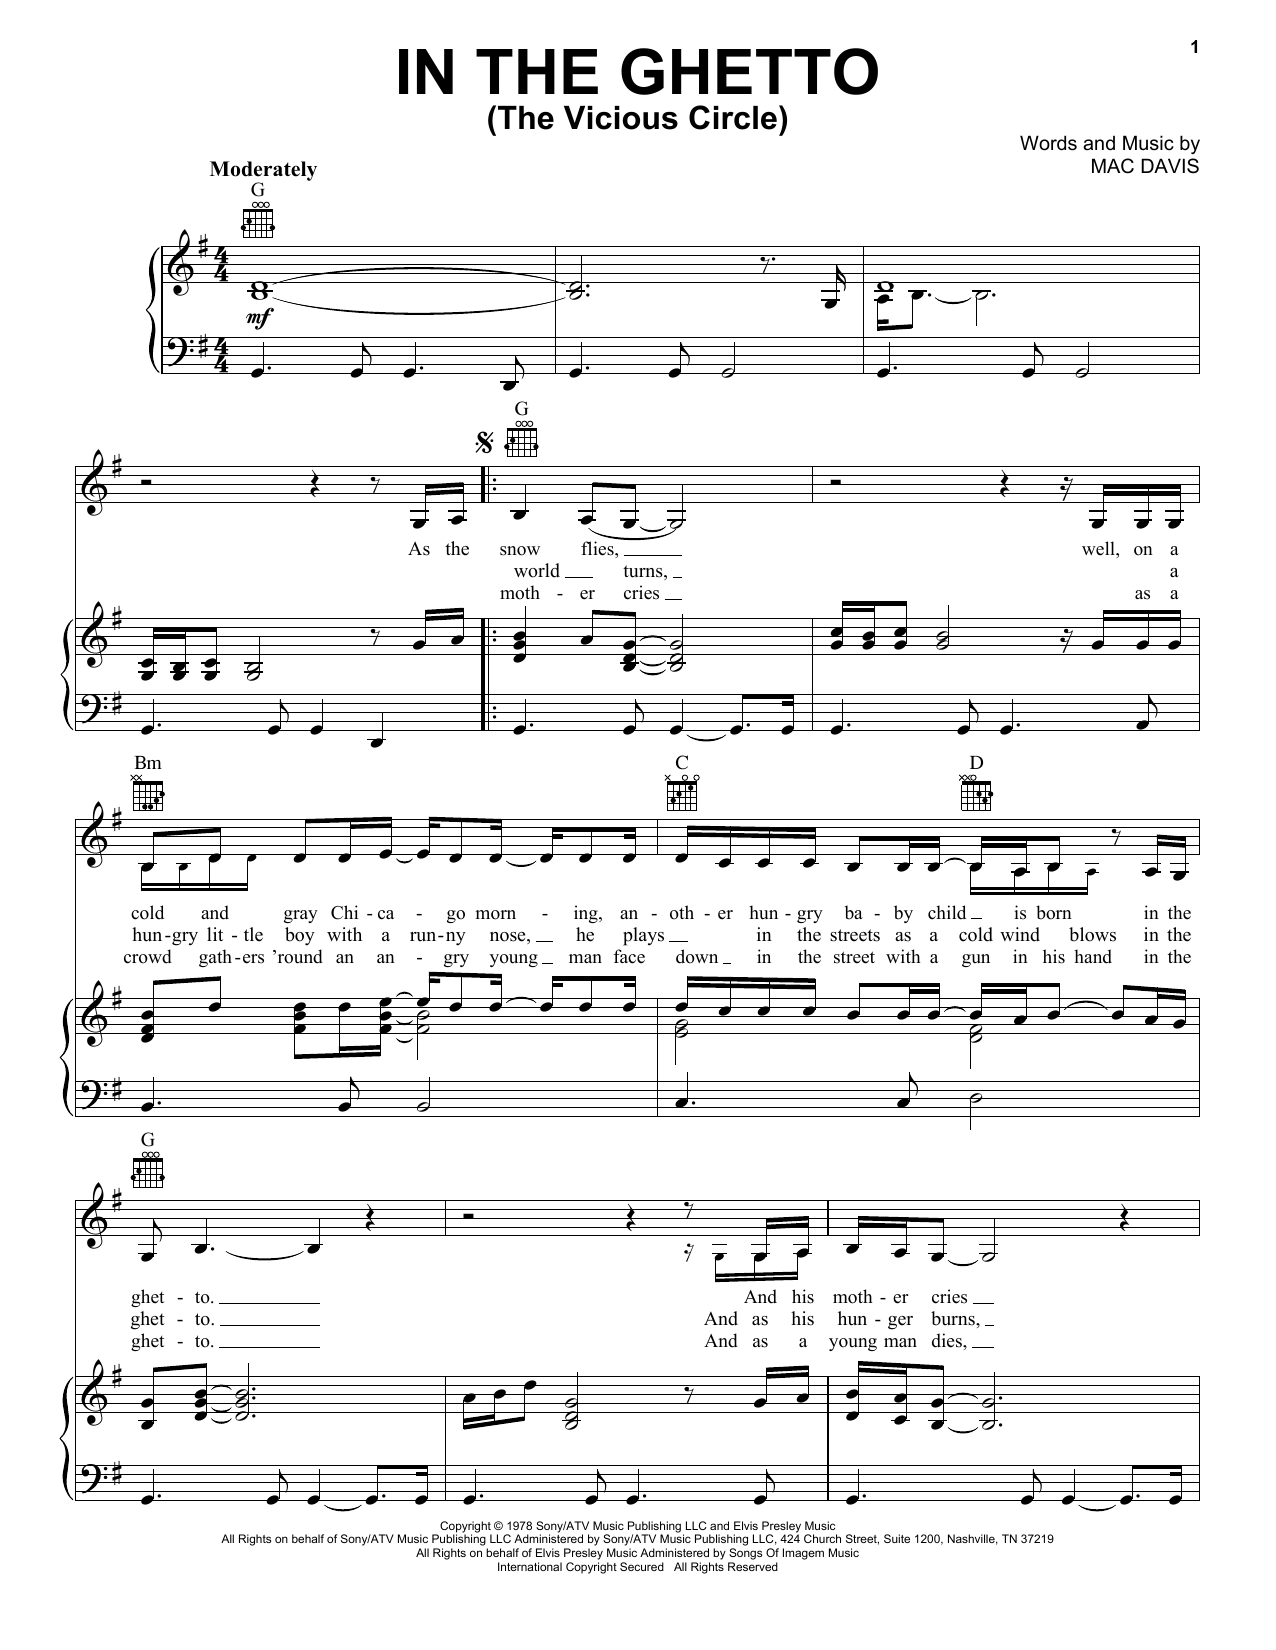 Elvis Presley In The Ghetto (The Vicious Circle) sheet music notes and chords. Download Printable PDF.